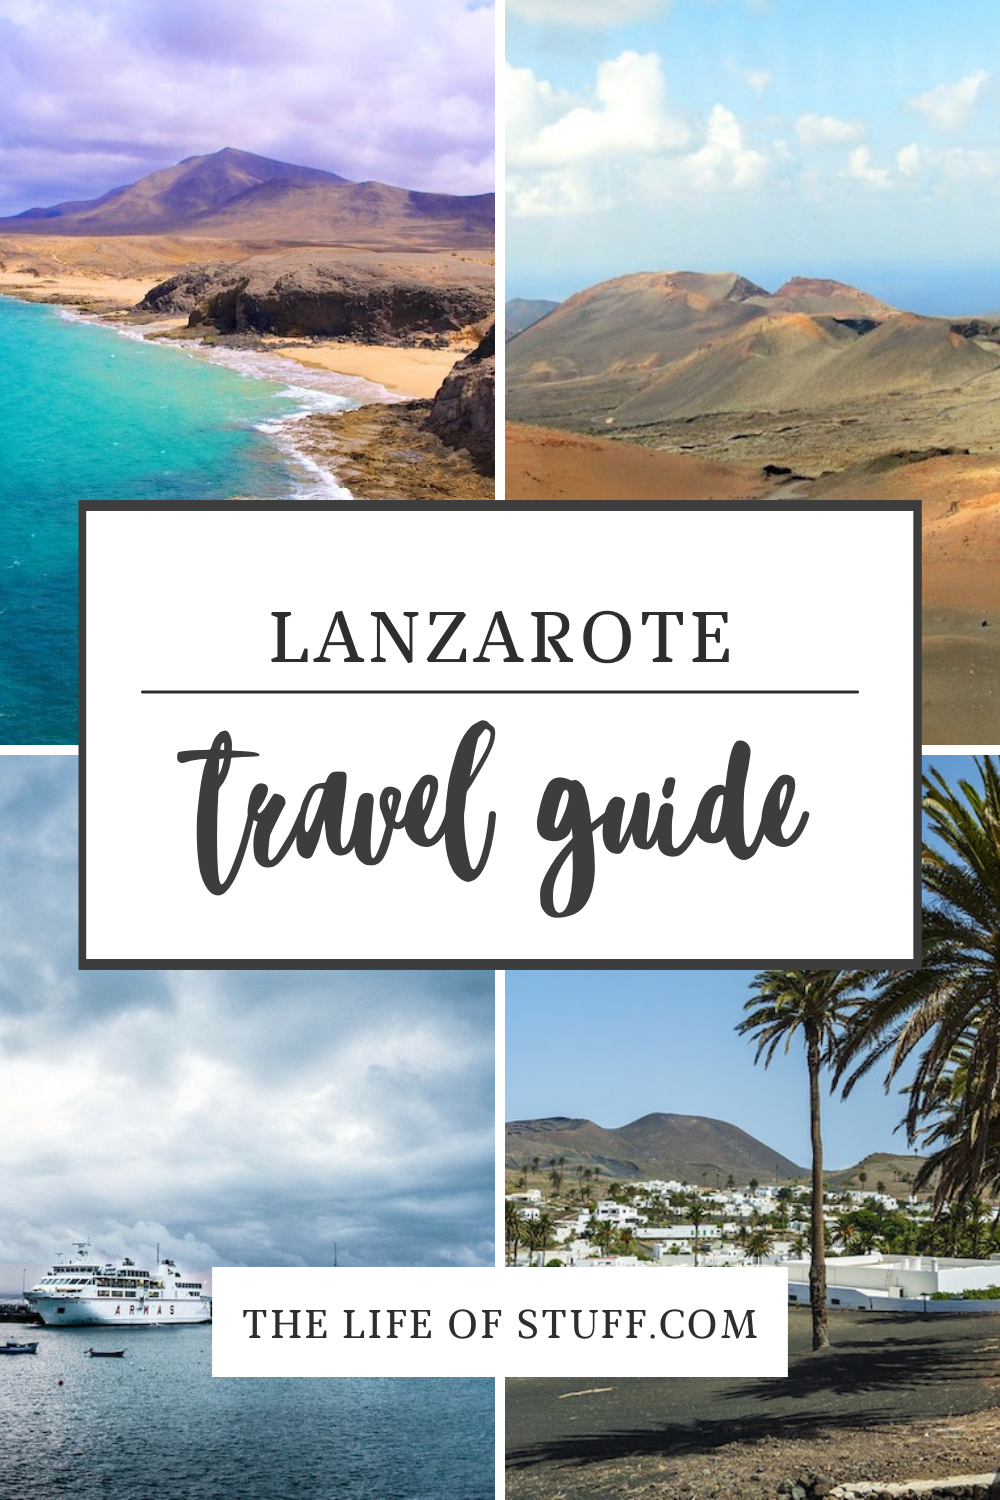 The Beautiful Island of Lanzarote Offers Spectacular Scenery - The Life of Stuff